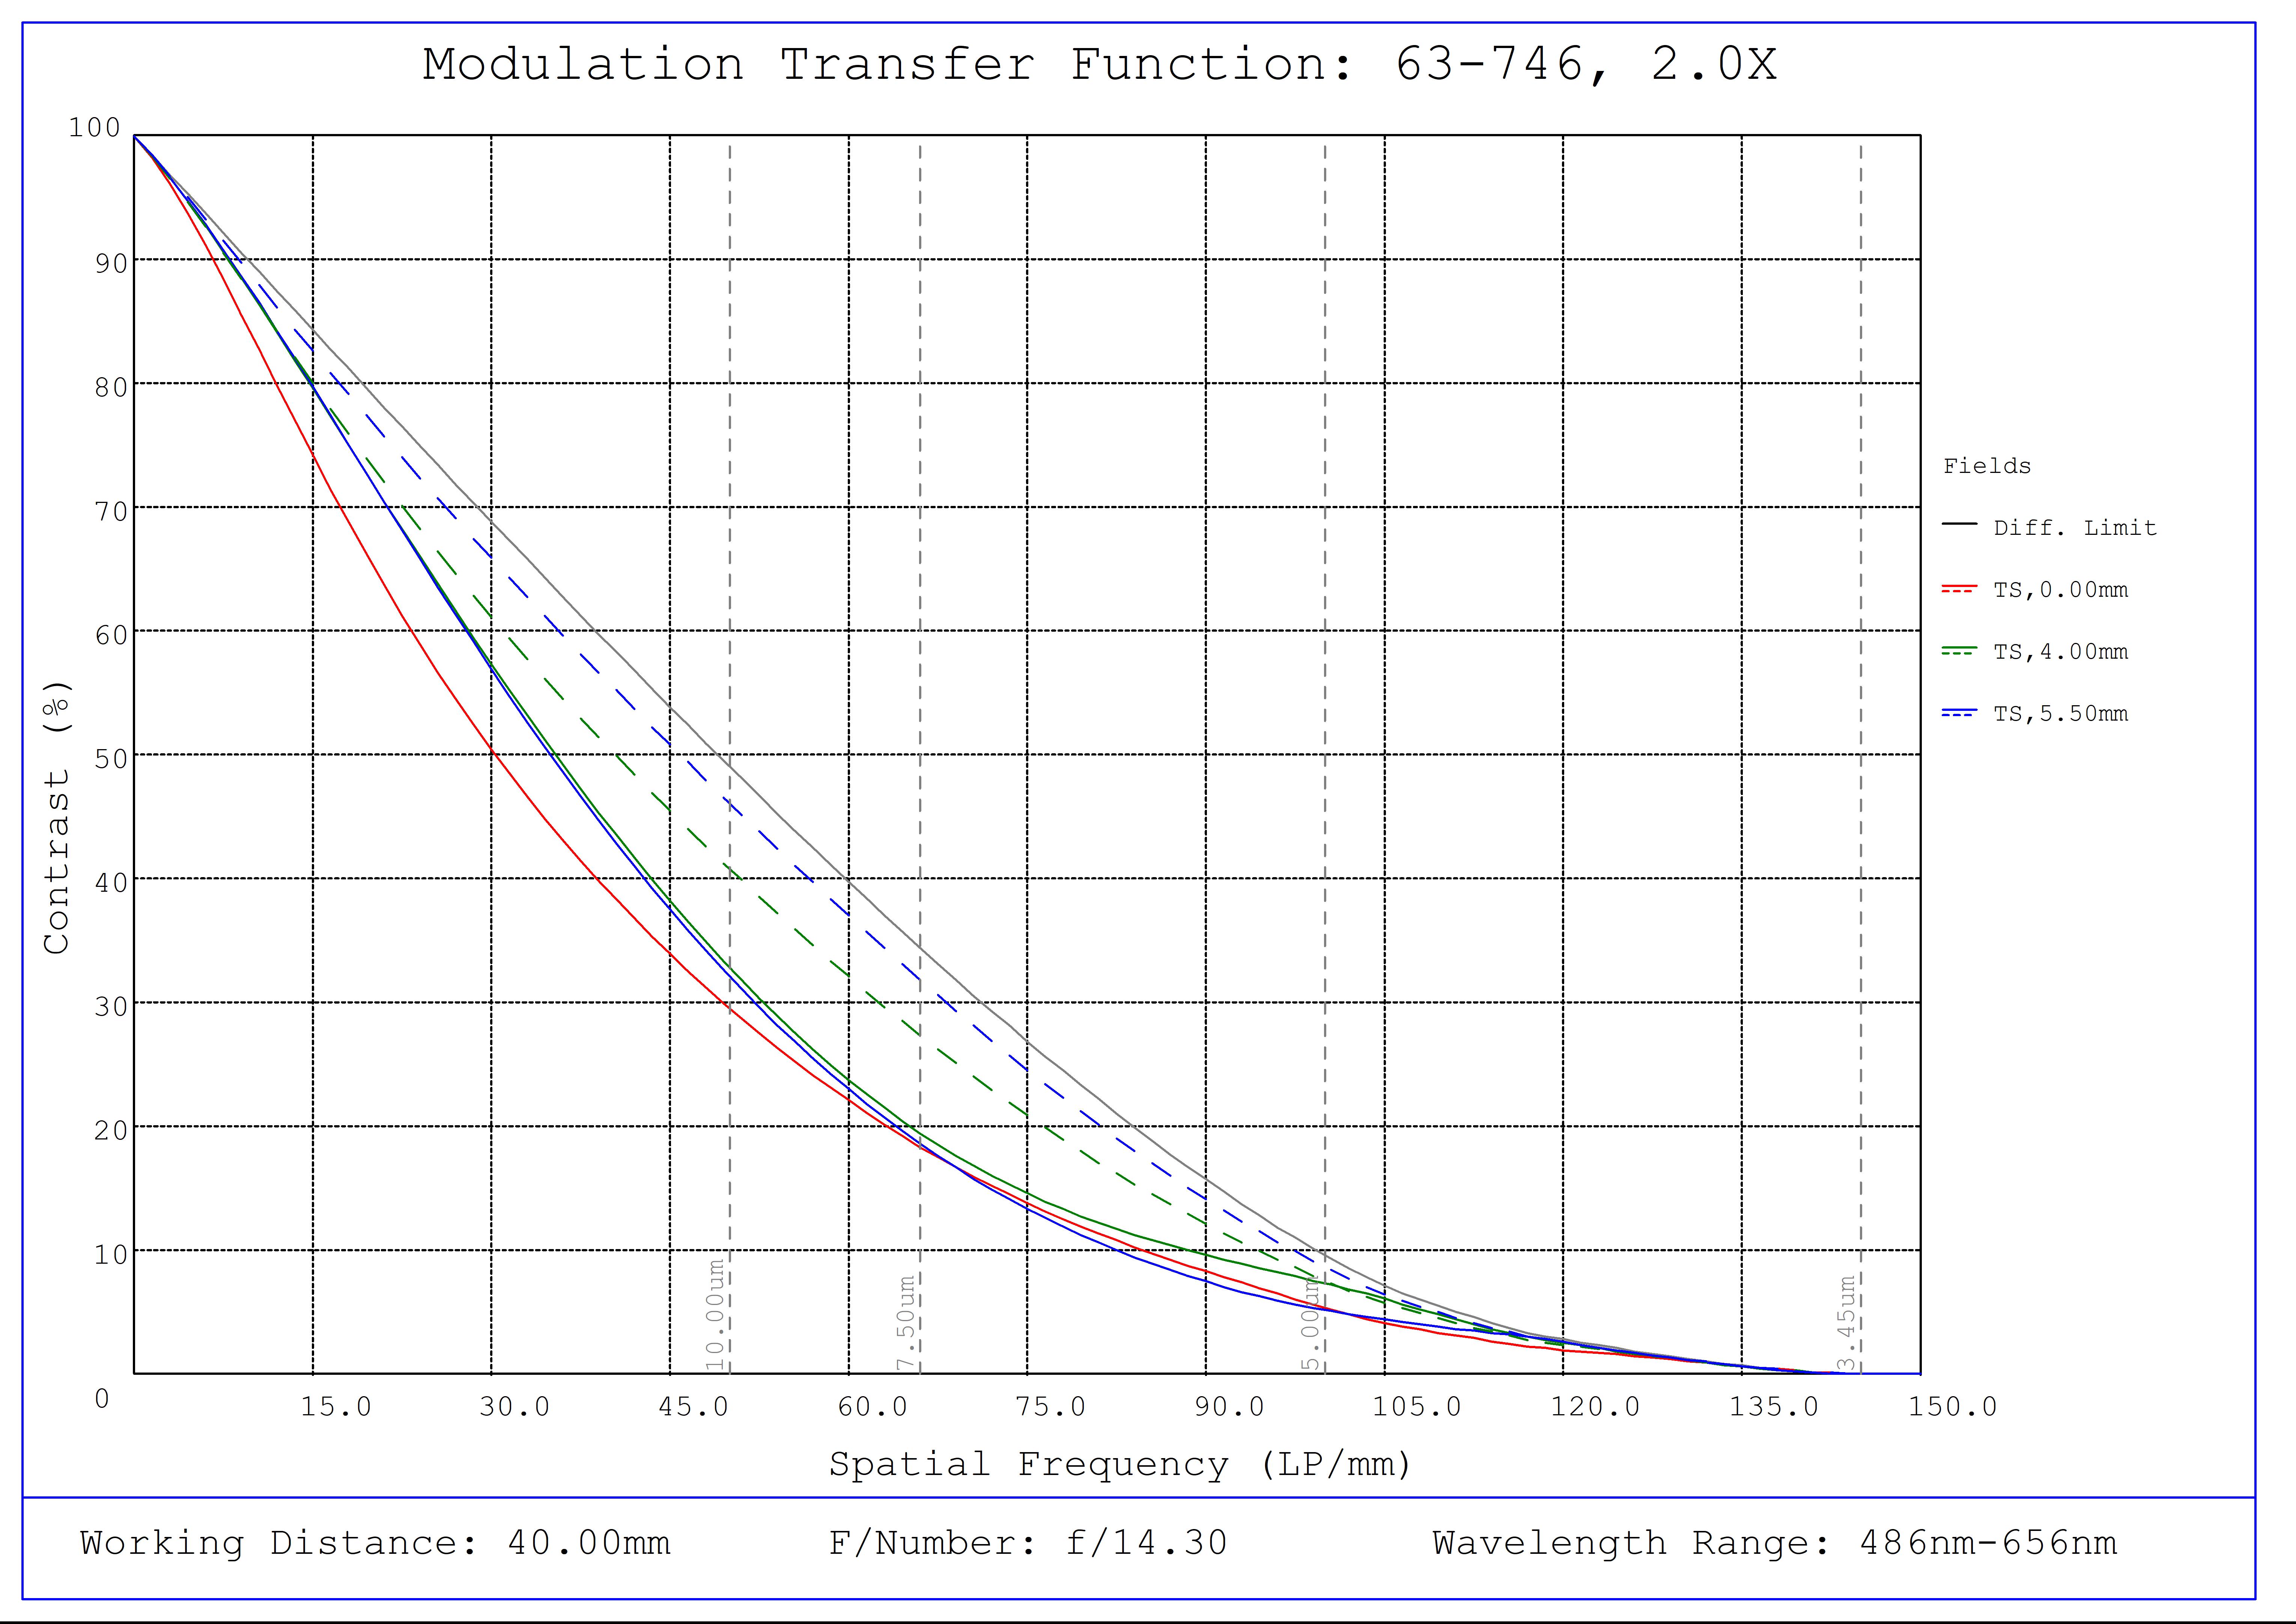 #63-746, 2X, 40mm WD CompactTL™ Telecentric Lens , Modulated Transfer Function (MTF) Plot, 40mm Working Distance, f14.3